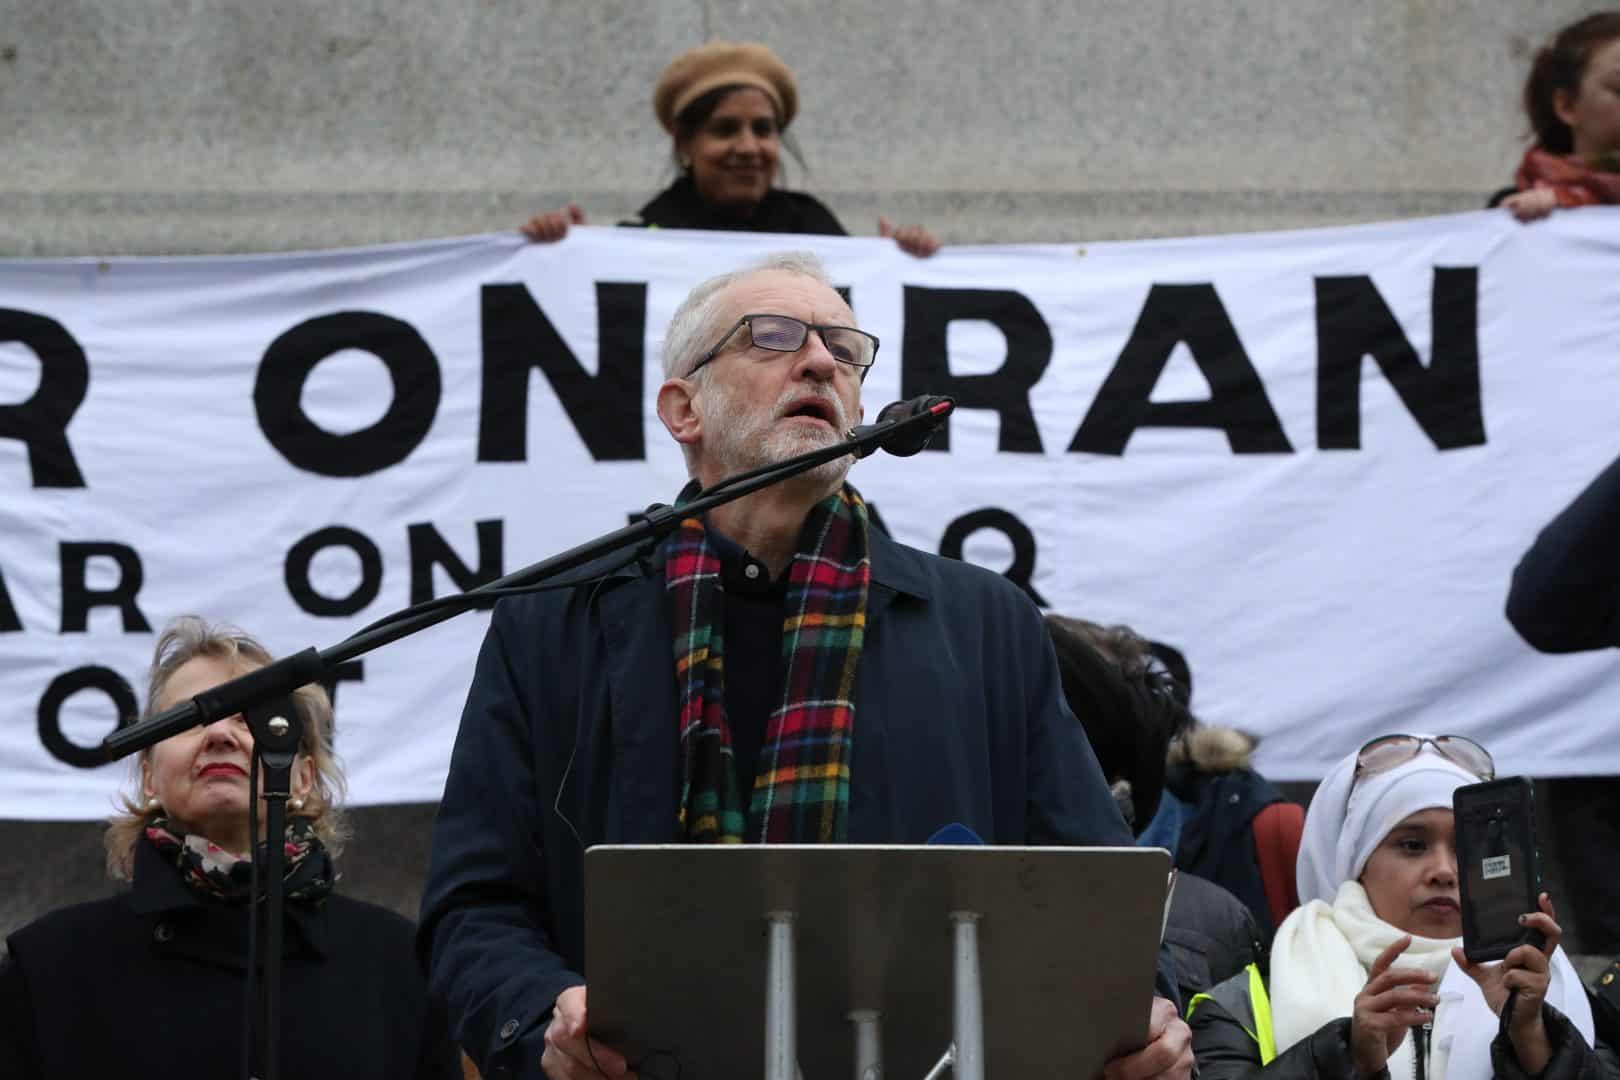 Corbyn warns of ’spiral of violence,’ saying there’s no excuse for Iran downing plane